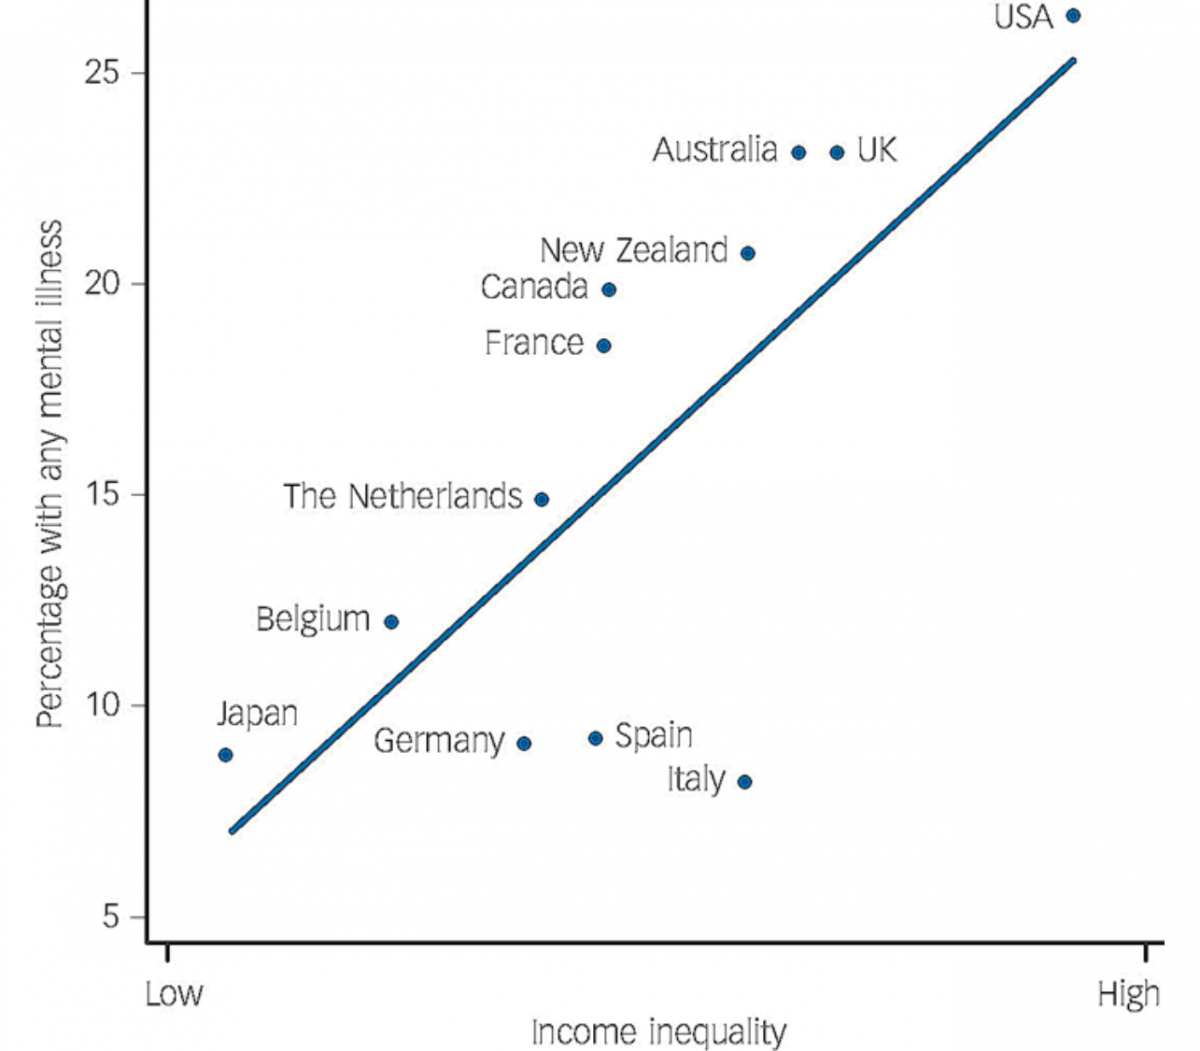 A graph showing the income inequality on the x axis, moving from low to high as we move right and percentage with any mental illness on the y axis, ranging from 5 to 25, with a 5 unit scale. It shows 12 countries.